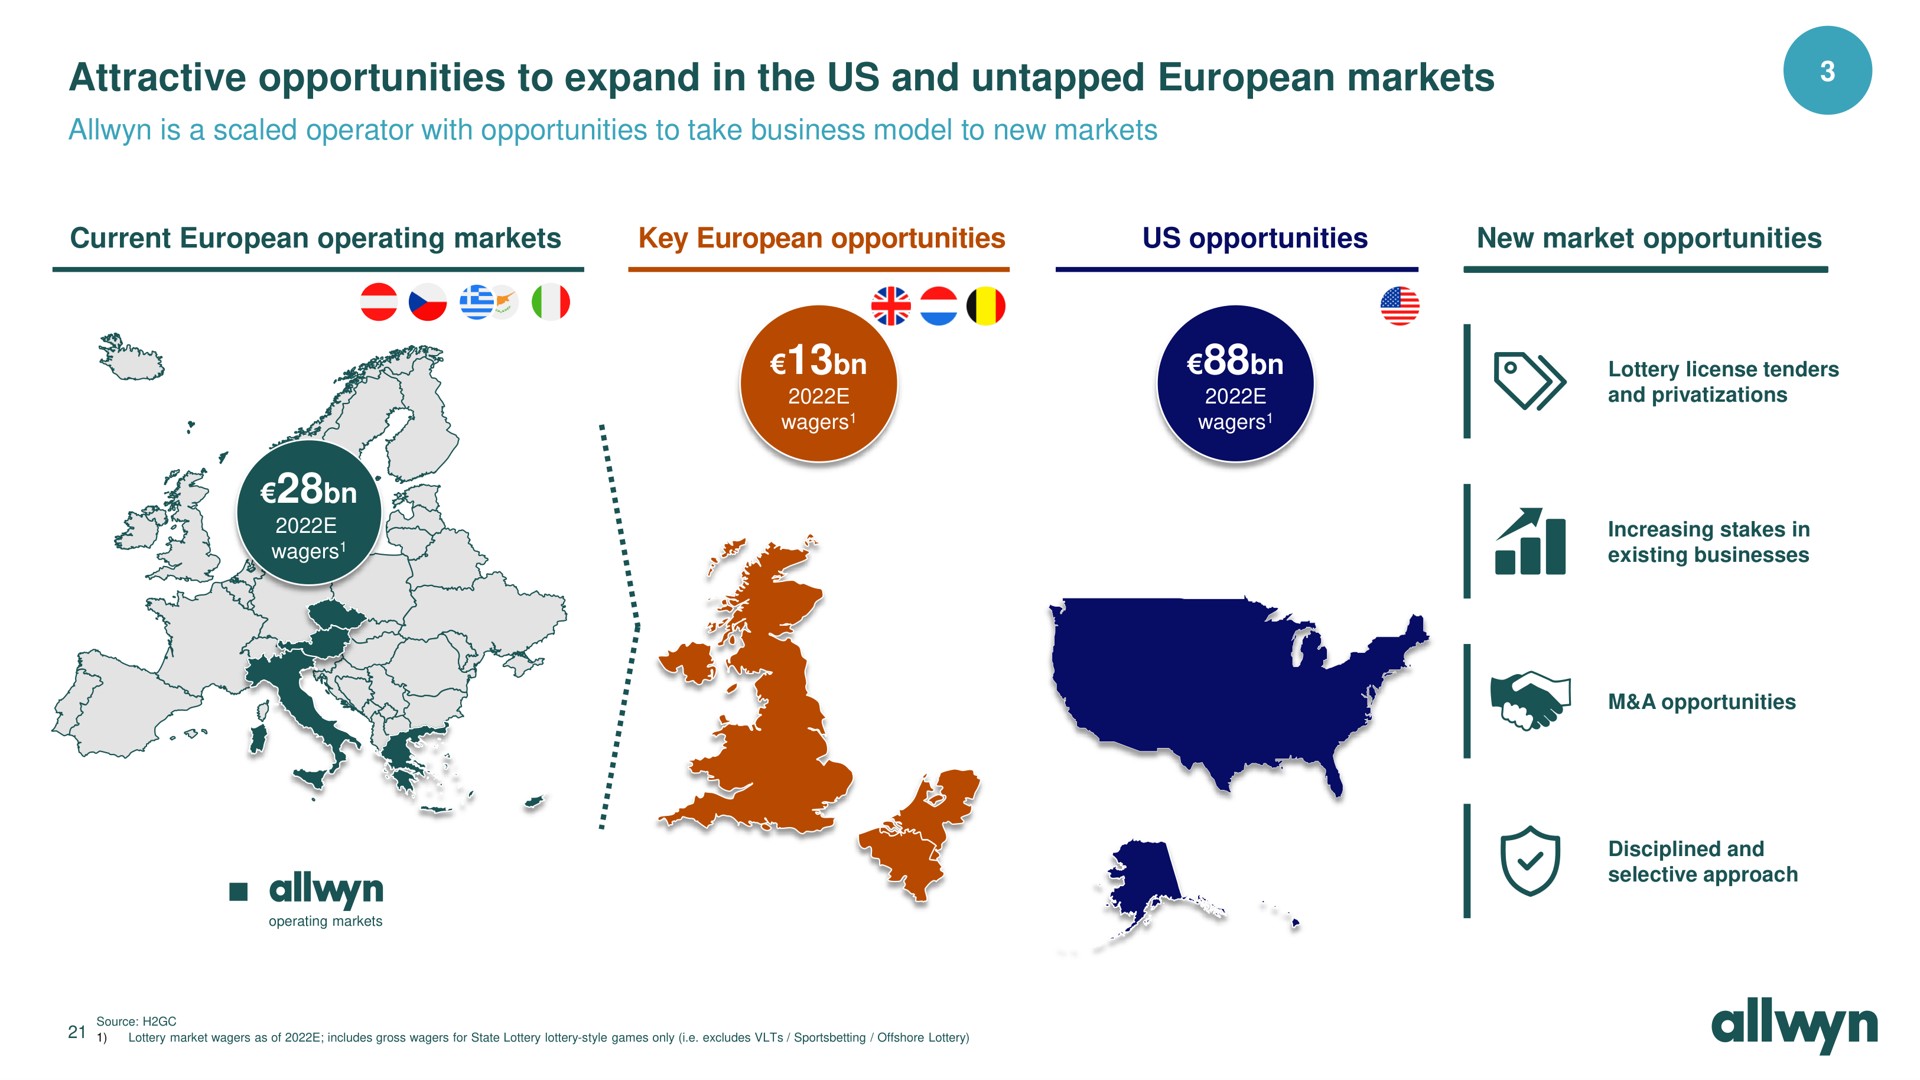 attractive opportunities to expand in the us and untapped markets is a scaled operator with opportunities to take business model to new markets | Allwyn